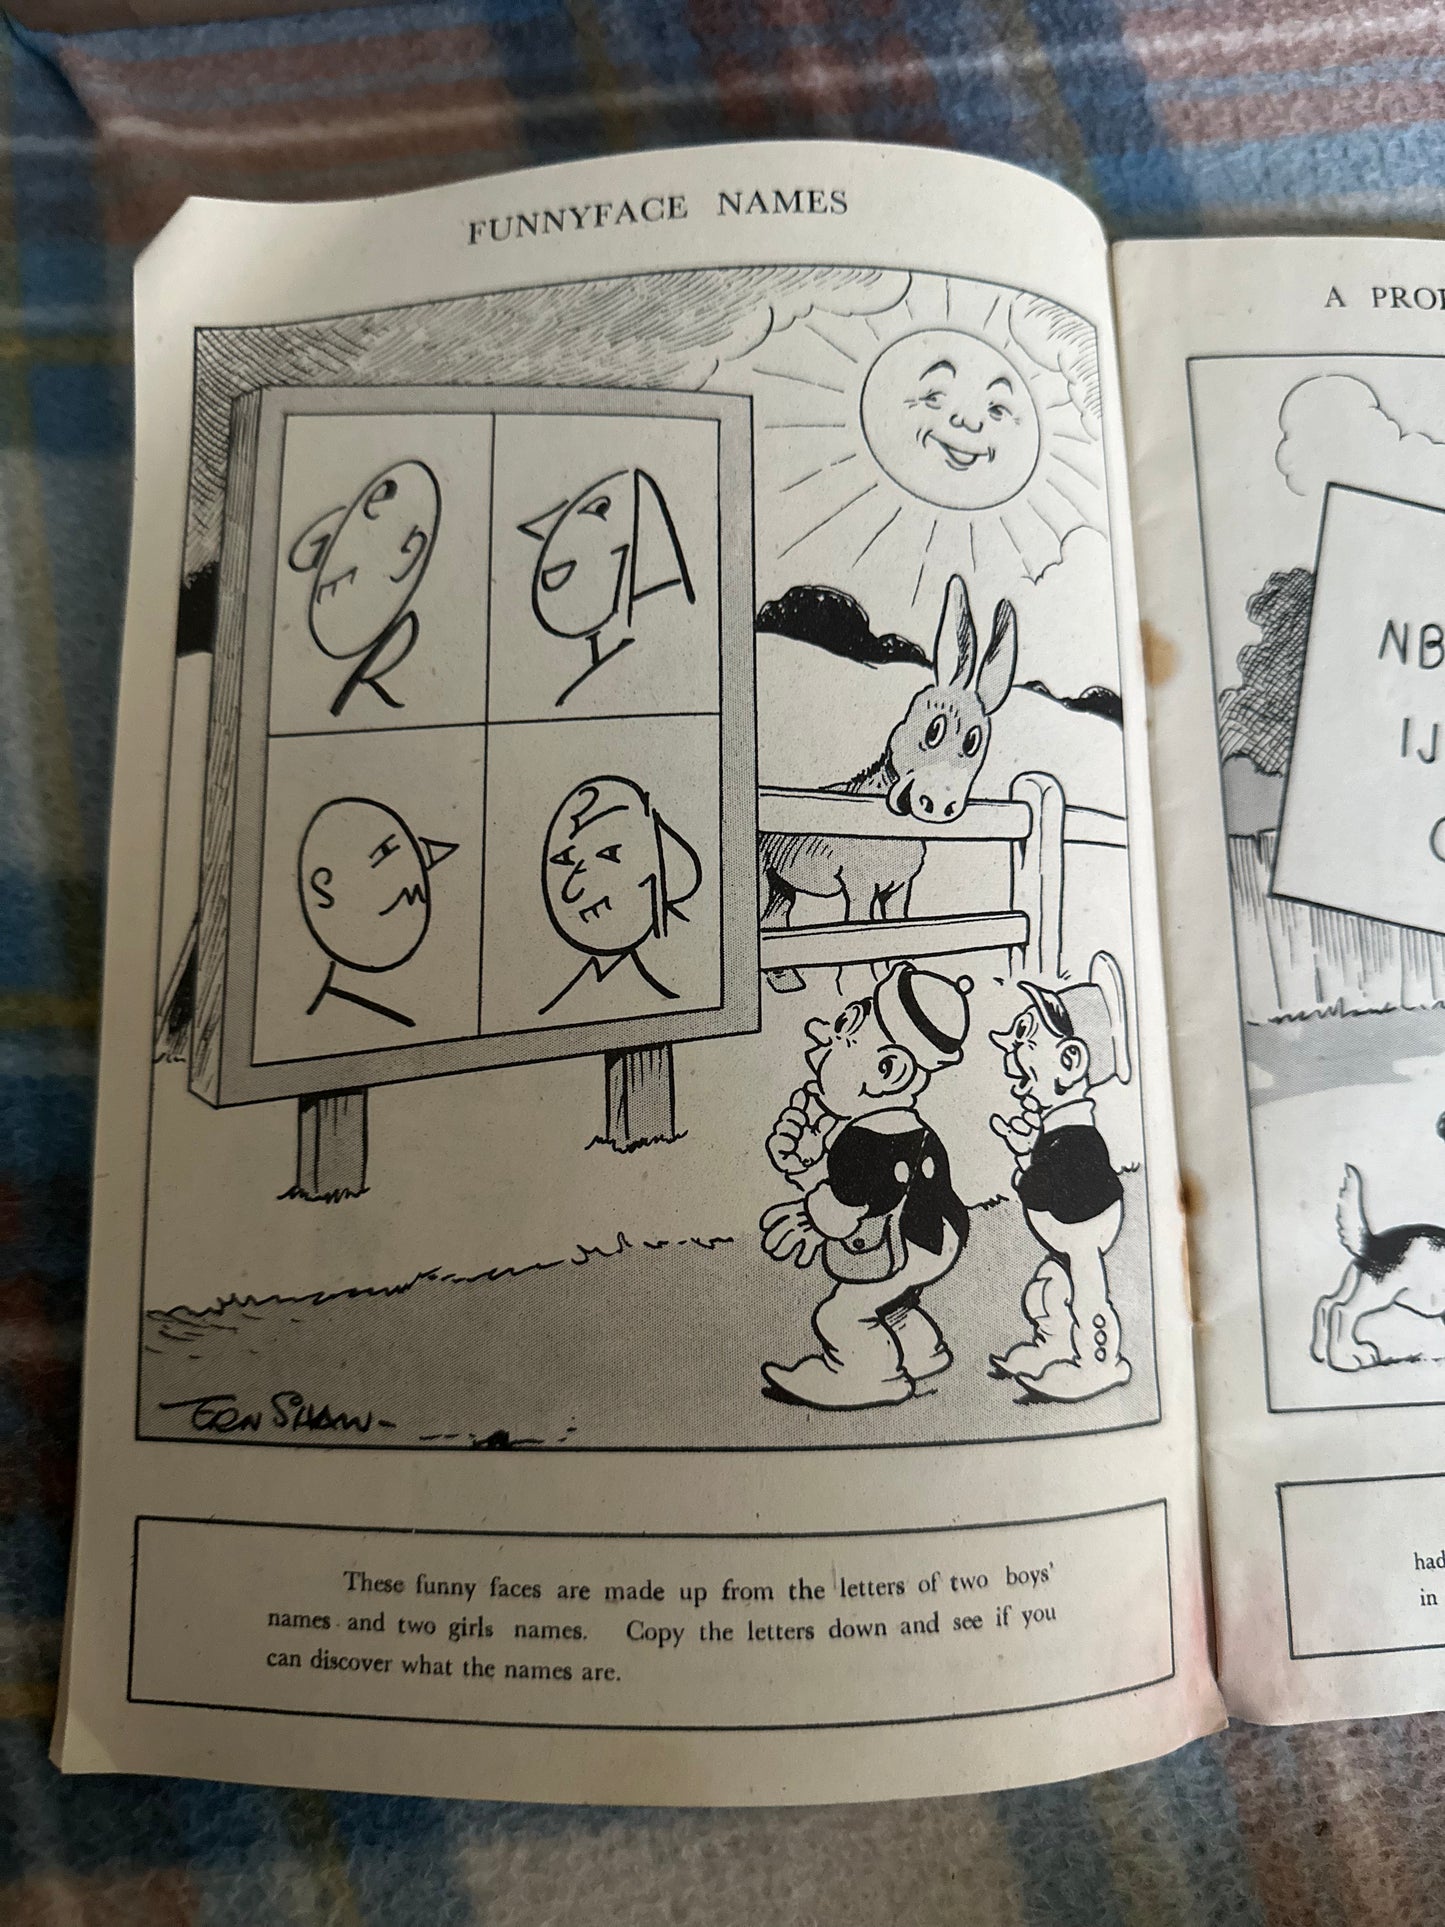 1940’s The Dingbats’ Picture Puzzle Book (Tom Shaw illustration) printed in England